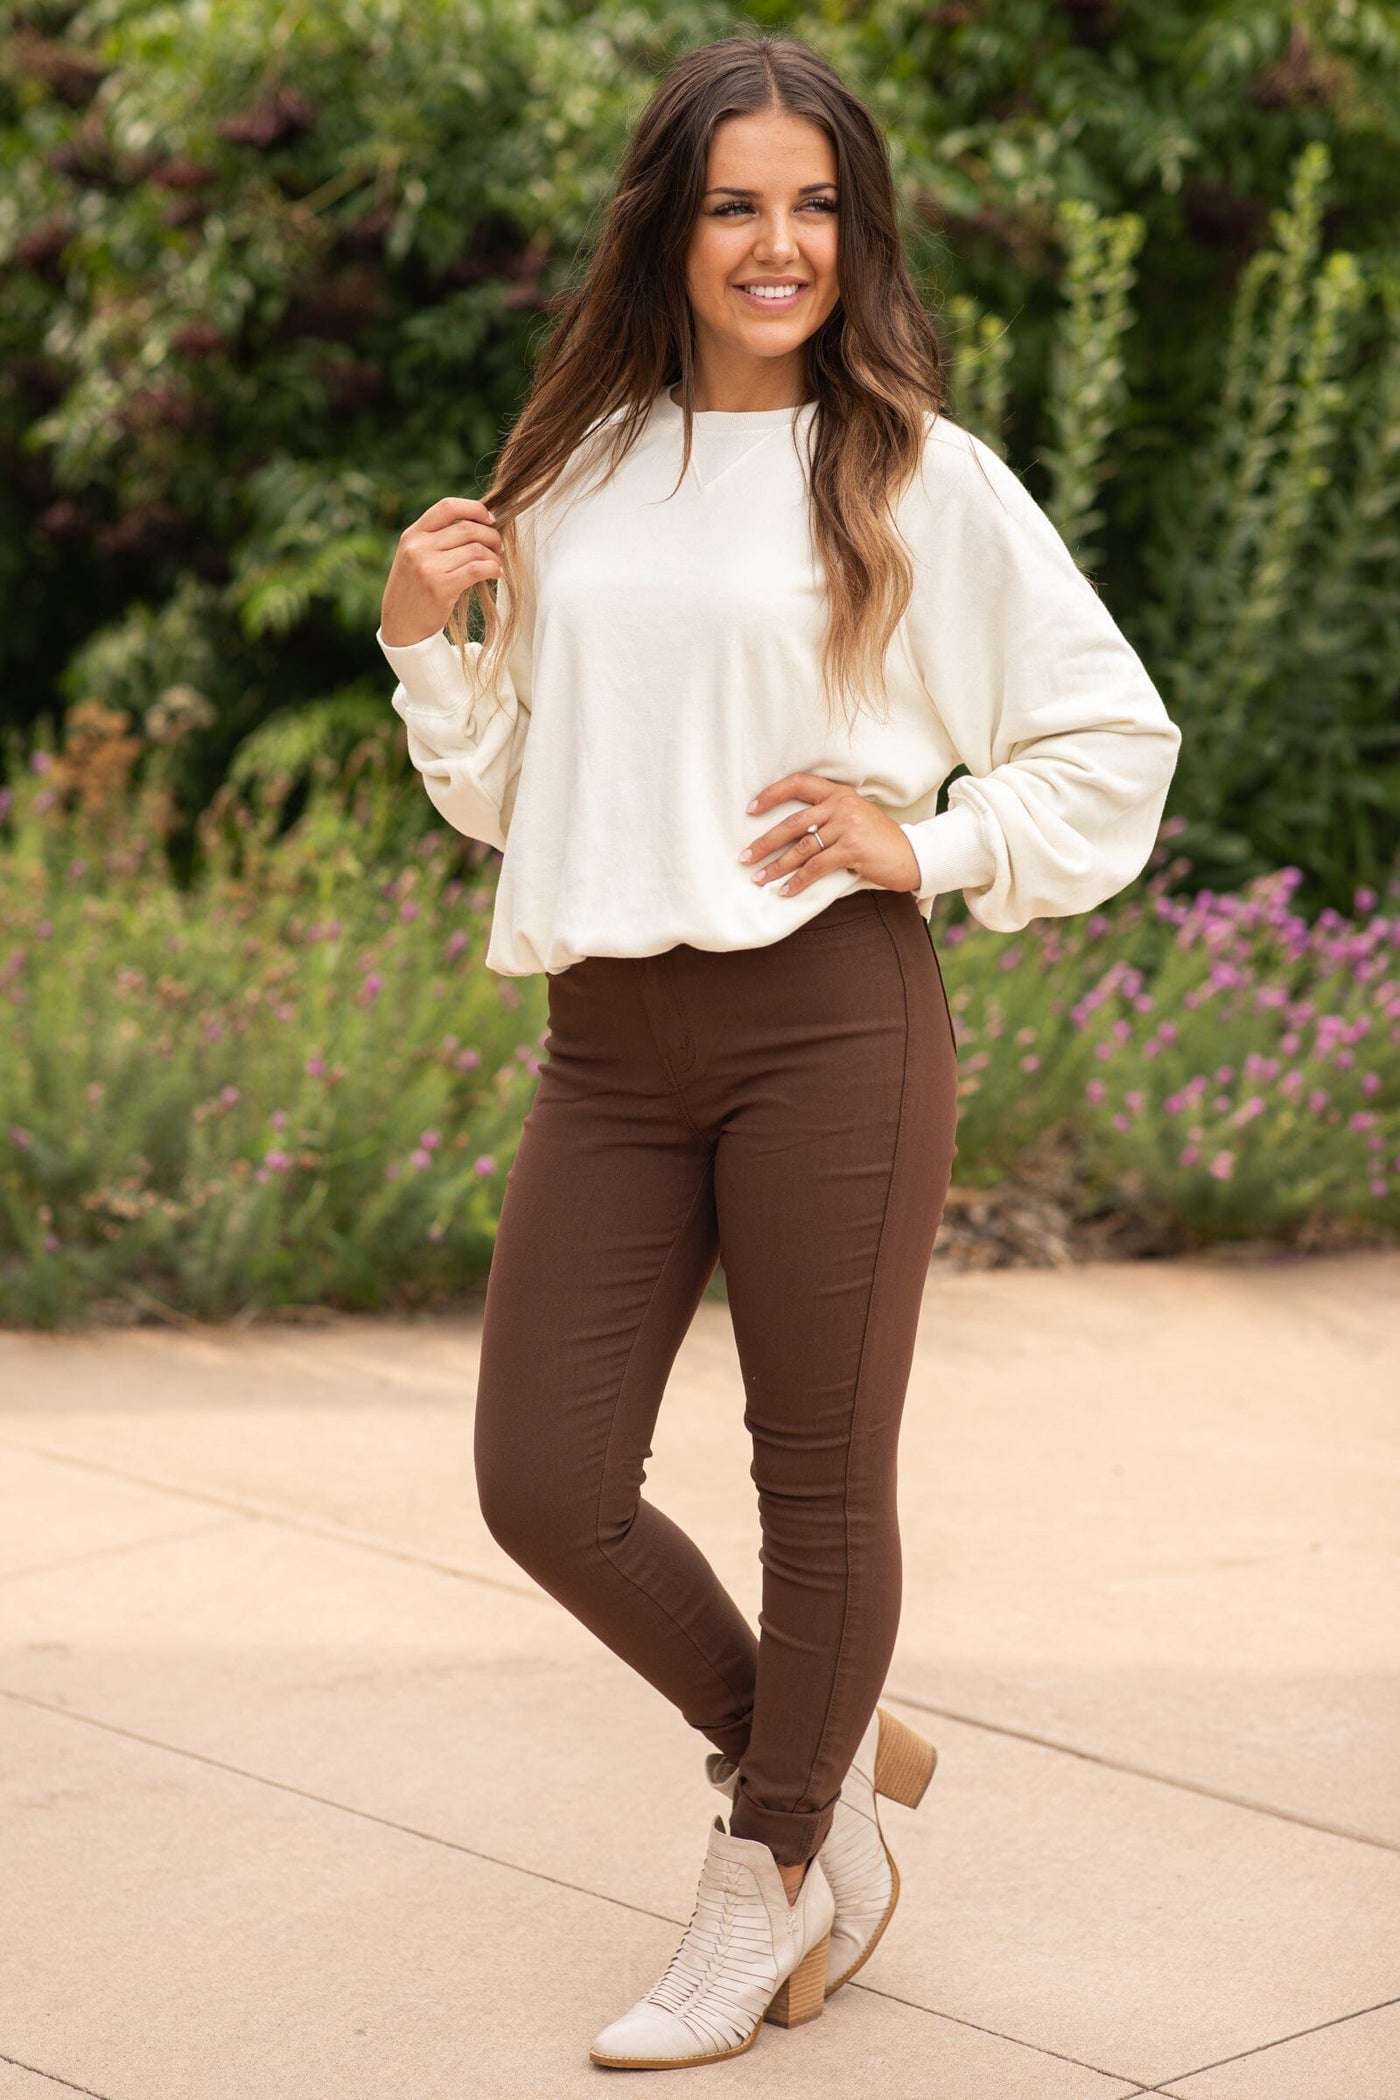 Brown Heeled Sandals with Skinny Jeans Outfits (26 ideas & outfits)